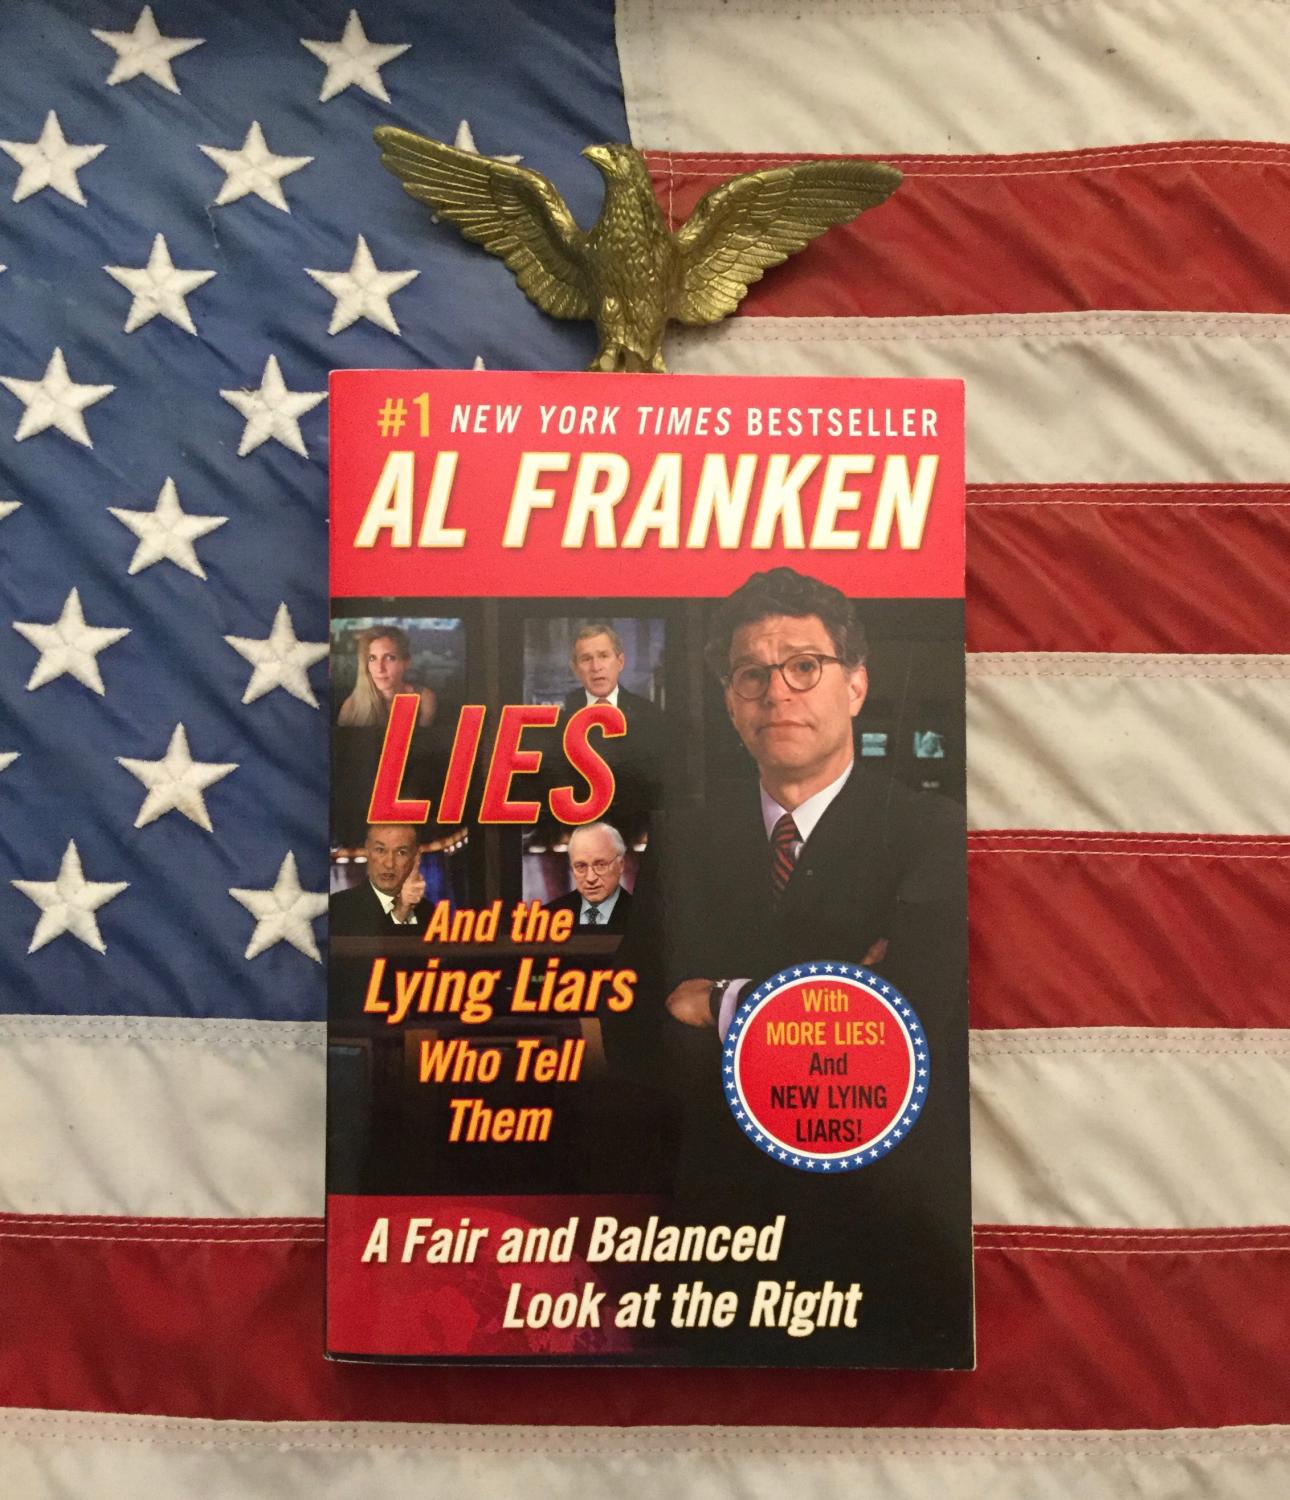 Balanced　Right　Author(s)　at　Them:　Look　and　Lies:　Fair　Lying　by　by　Tell　Liars　Fine　And　Bren-Books　Edition.,　the　the　1st　Franken,　Who　(2004)　Soft　cover　Al:　A　Inscribed